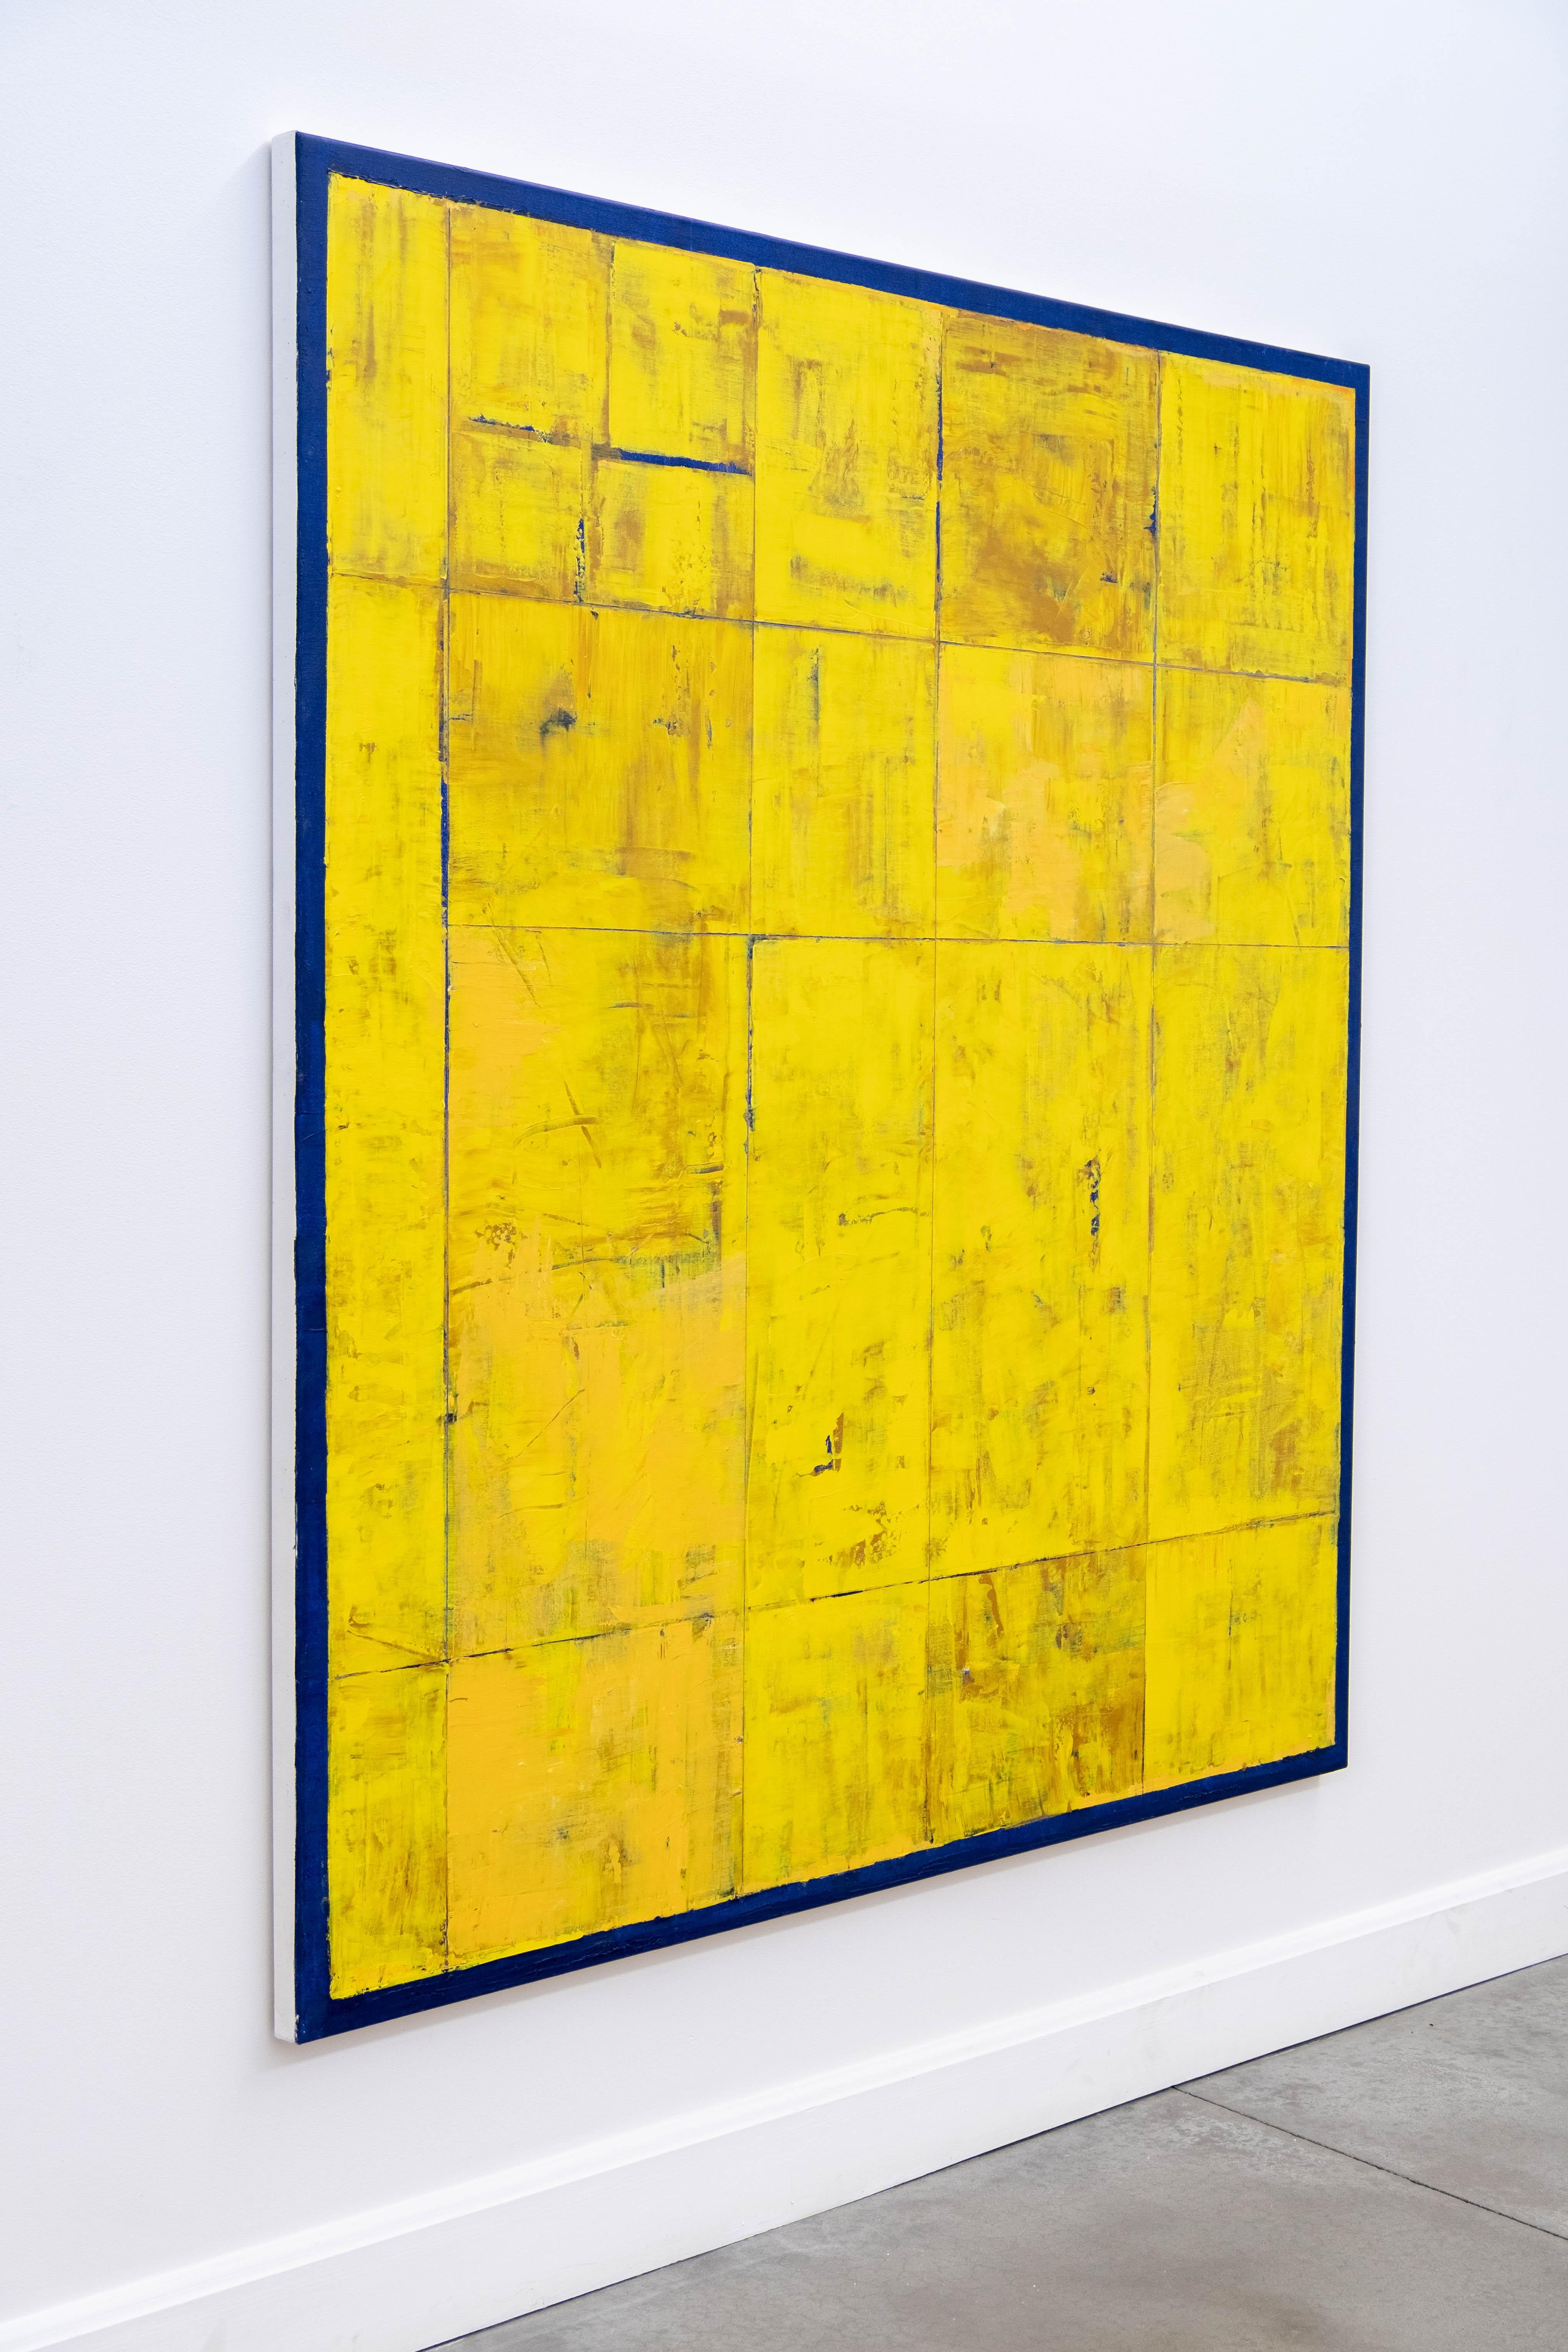 Amida - large, bright, colorful, yellow, abstract grid, modernist, oil on canvas - Yellow Abstract Painting by David Sorensen